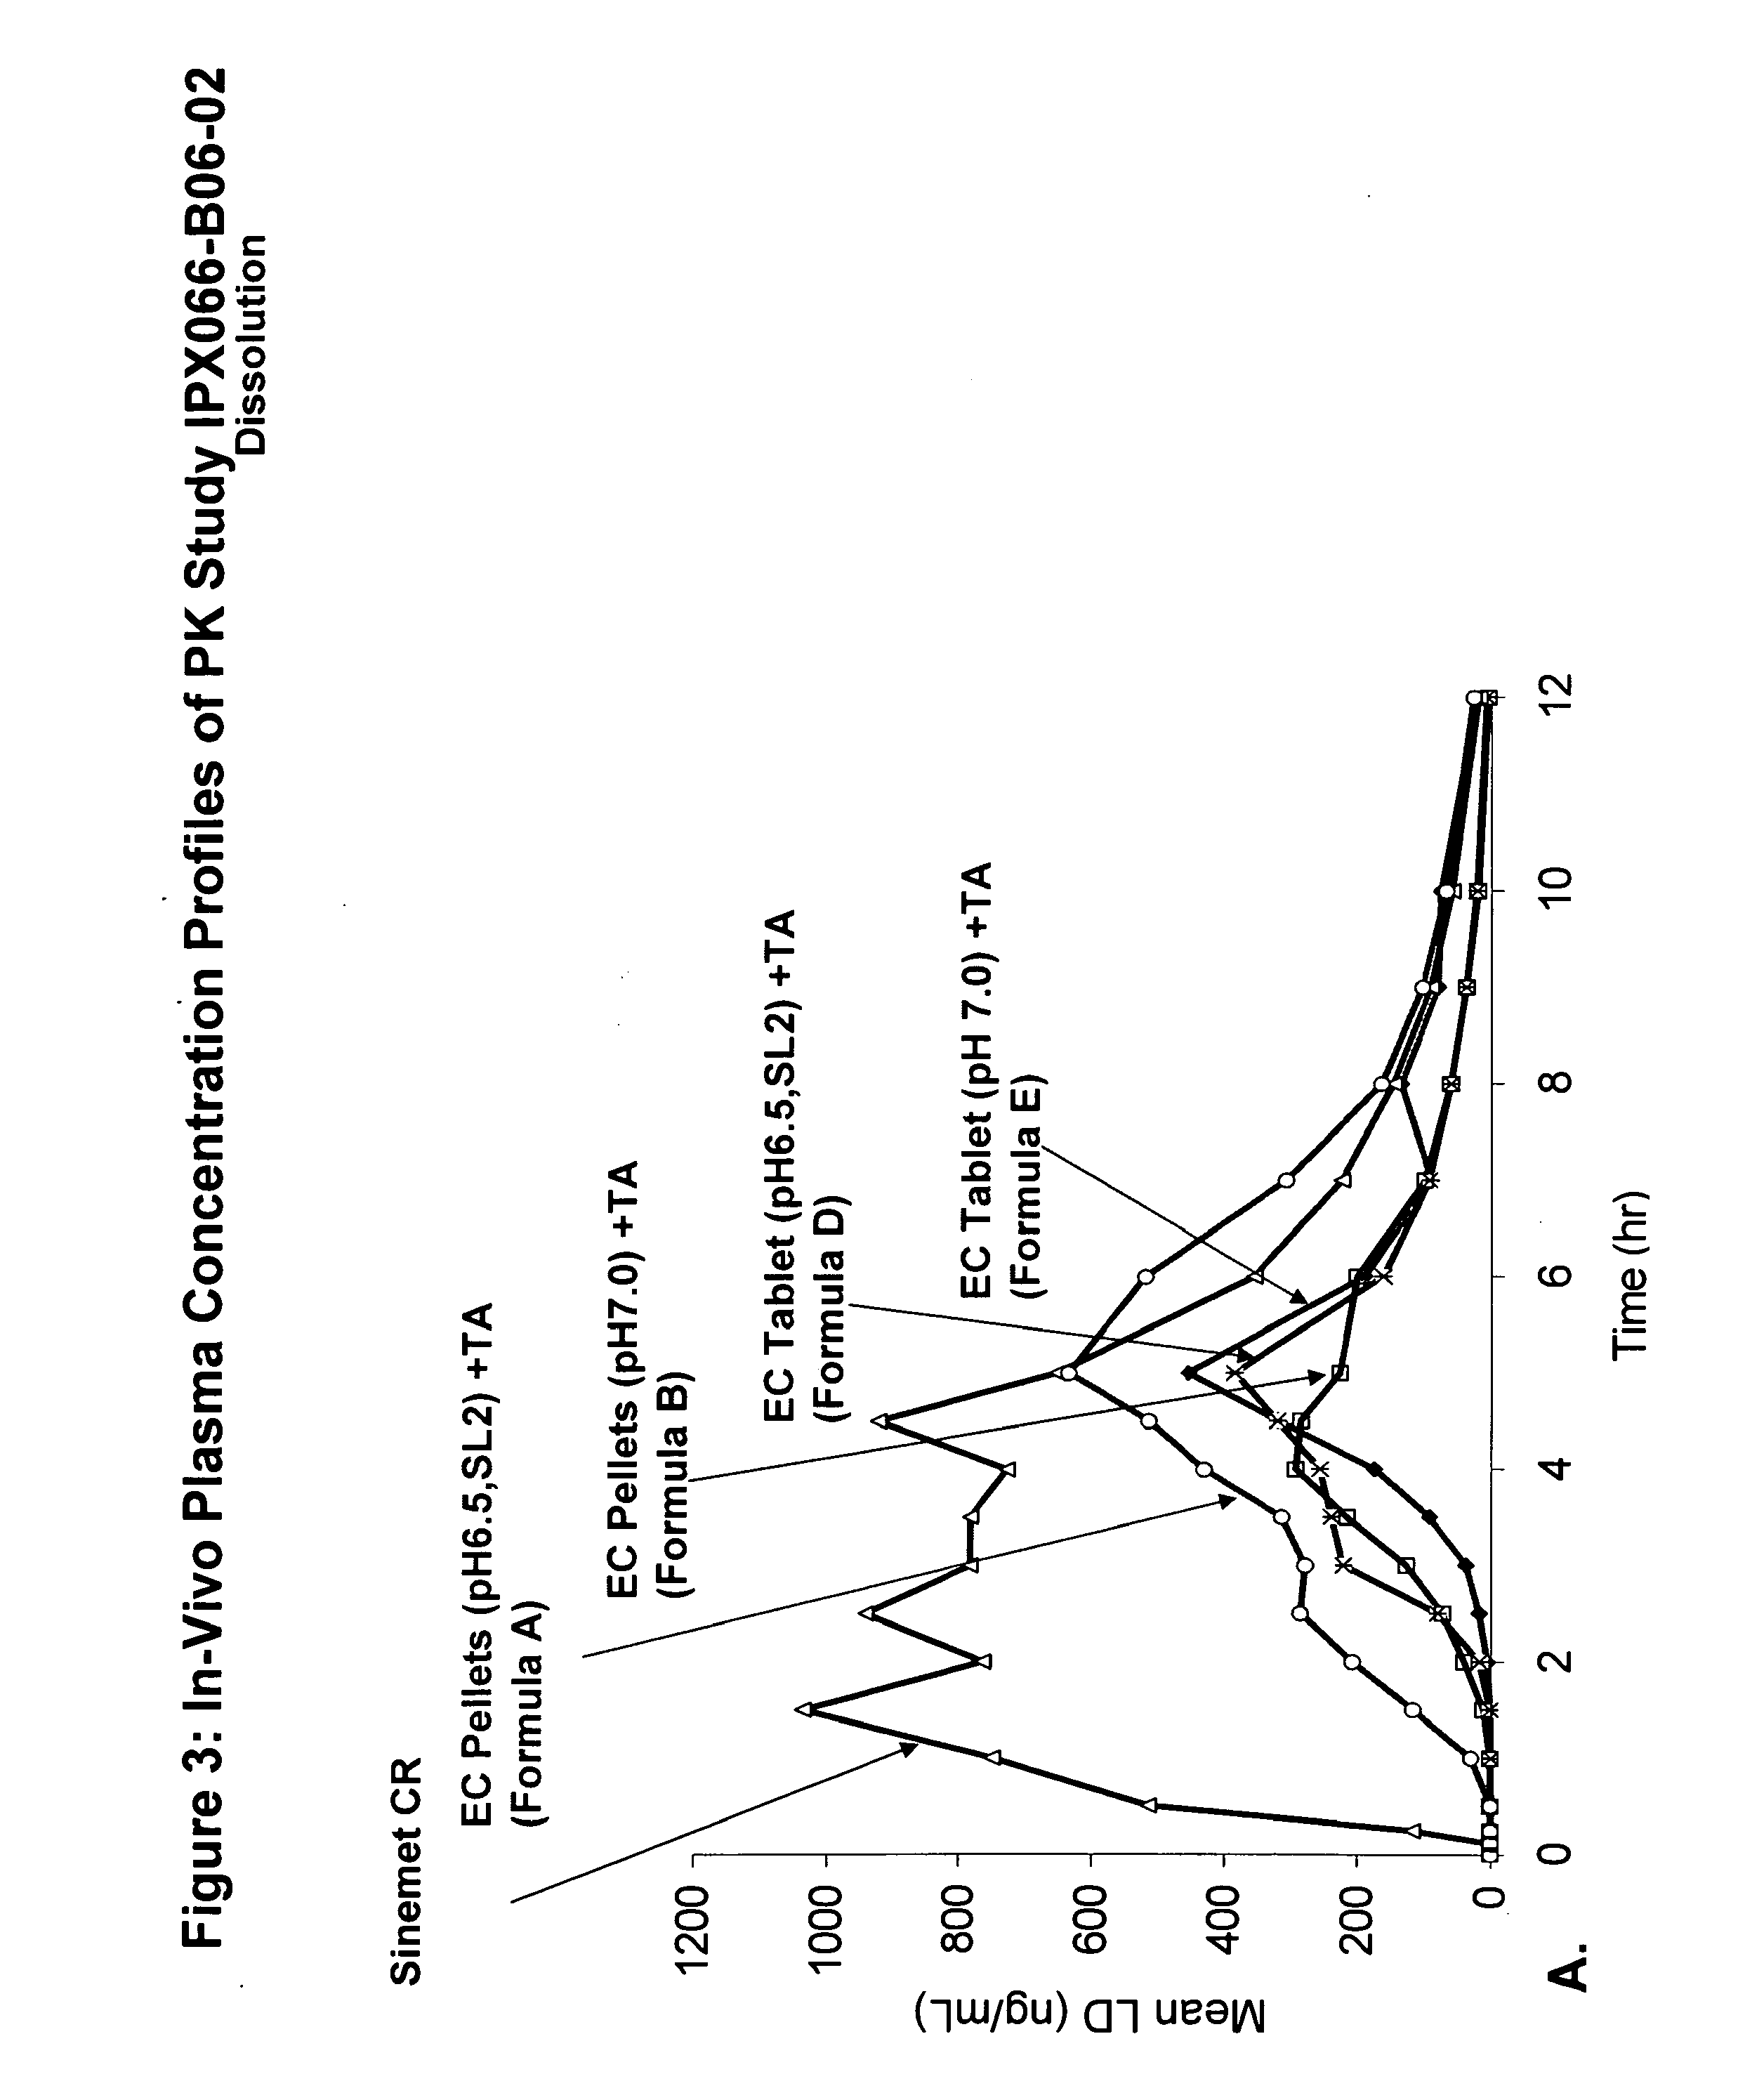 Controlled release formulations of levodopa and uses thereof